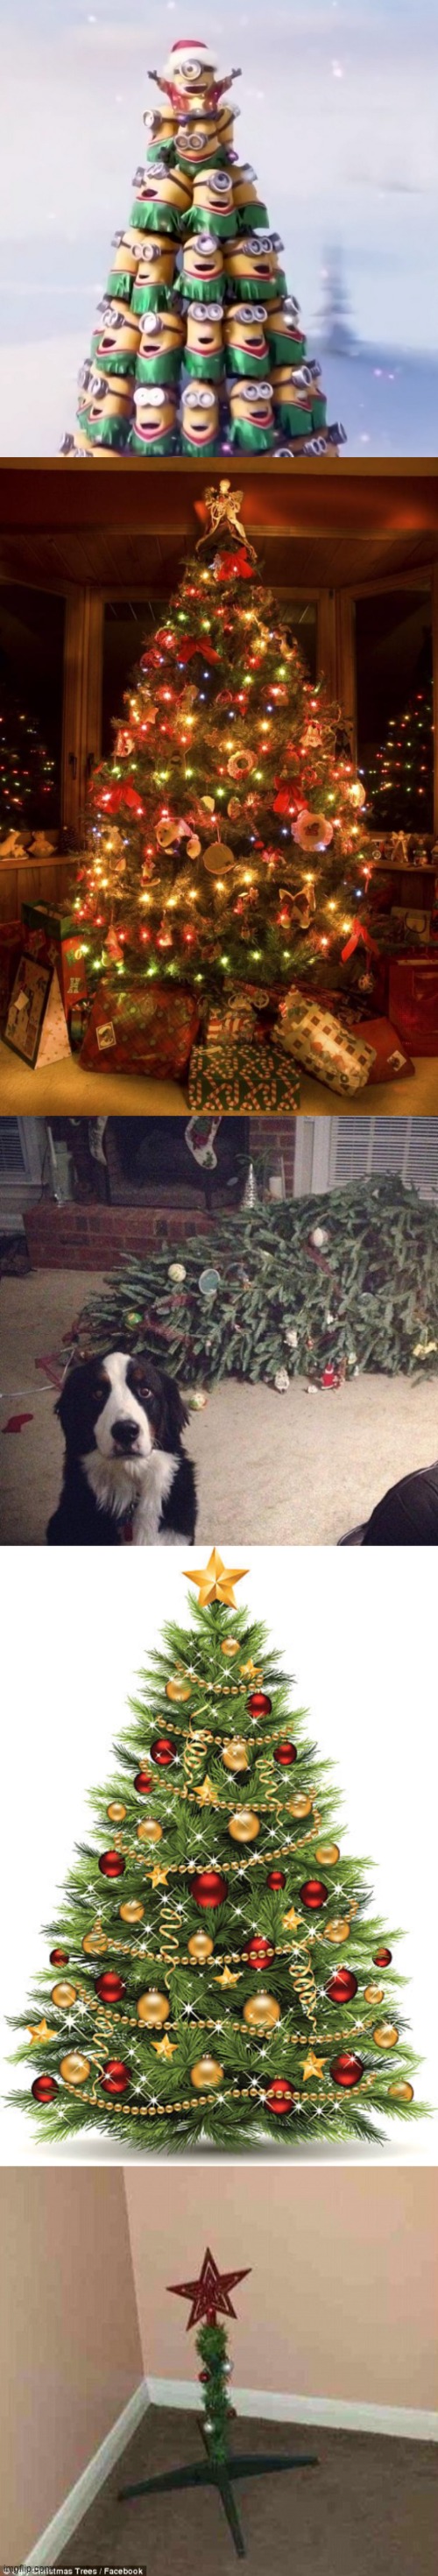 dare | image tagged in minion christmas tree,christmas tree,dog christmas tree | made w/ Imgflip meme maker